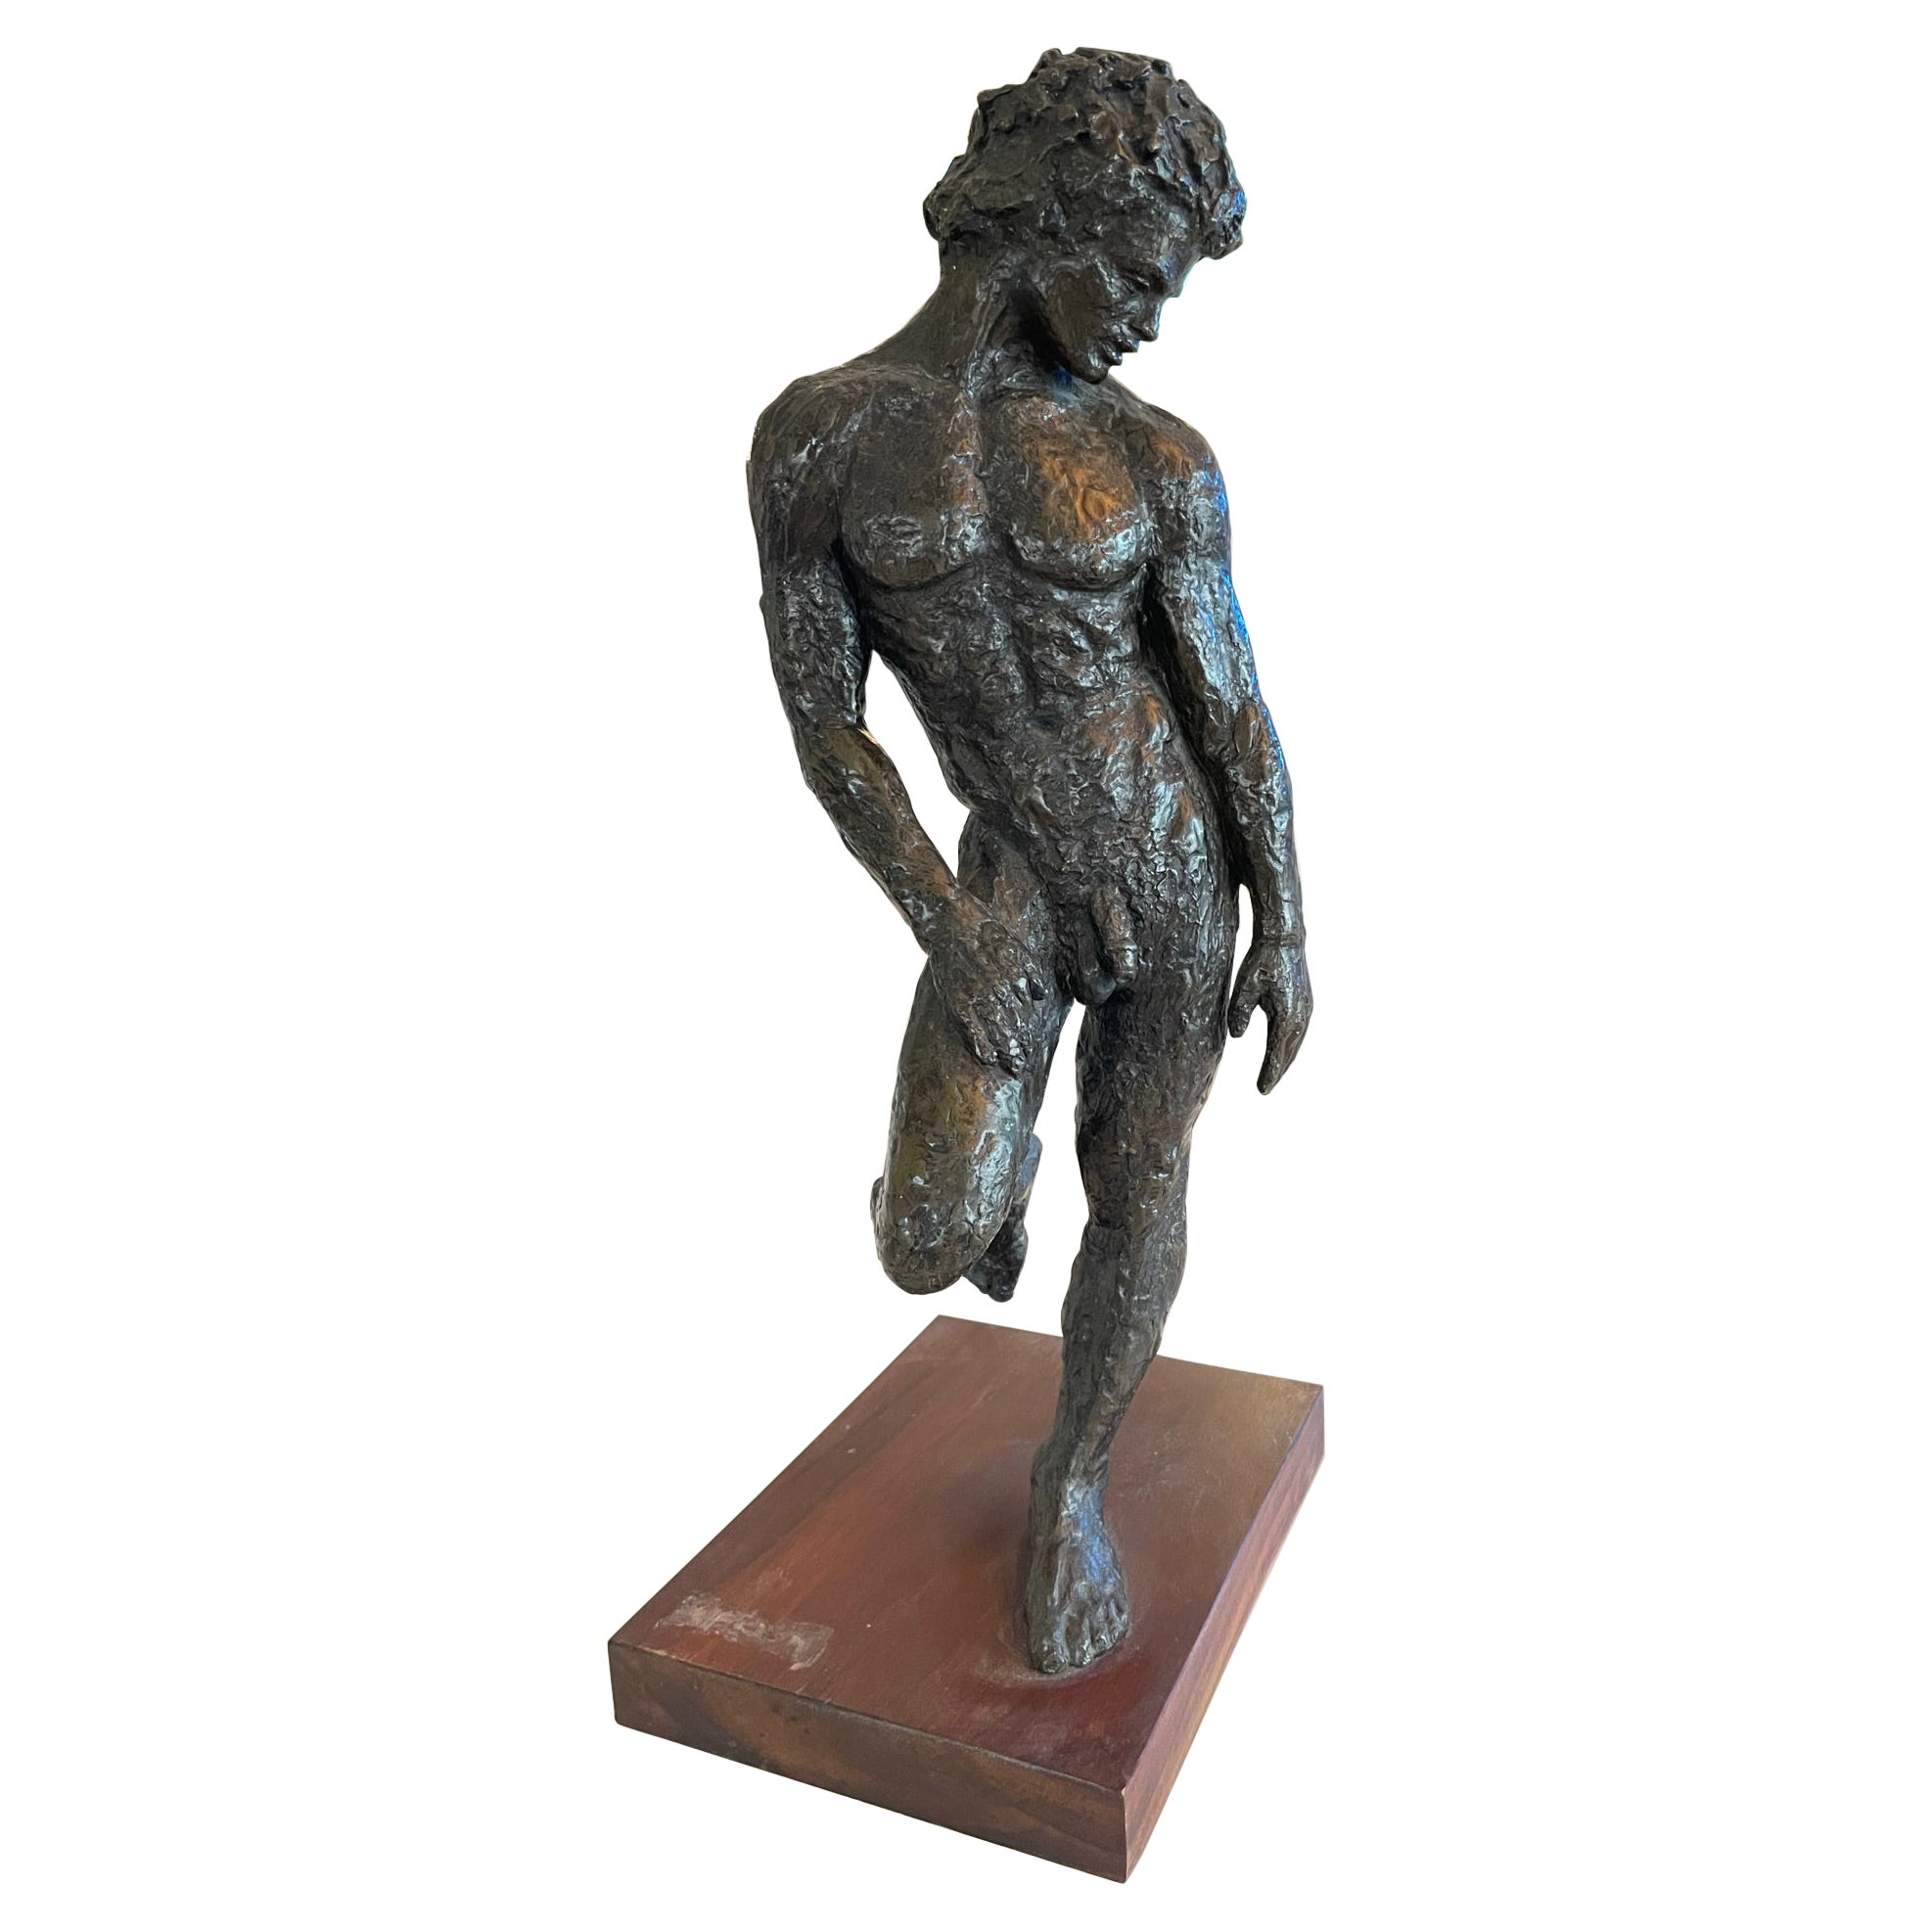 Anonymous. Antinous: Study I (Cast Bronze). Solid bronze of Antinous, Favorite of Hadrian 117-138 AD. A 20th Century sculpture. The young boy's exceptional beauty and grace attracted the attention of arguably, Rome' s greatest emperor Hadrian and